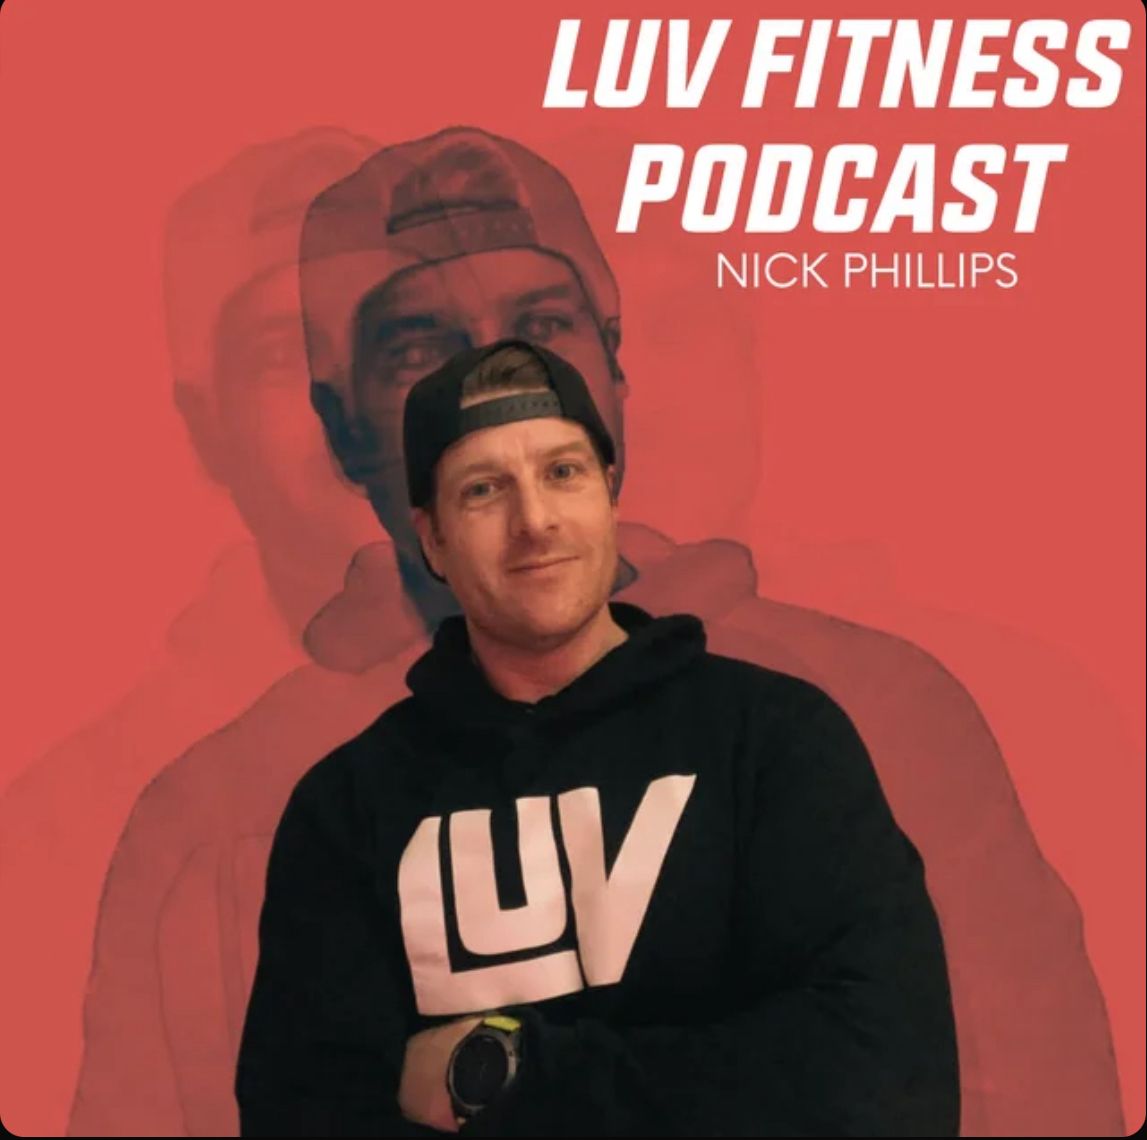 LUV FITNESS PODCAST